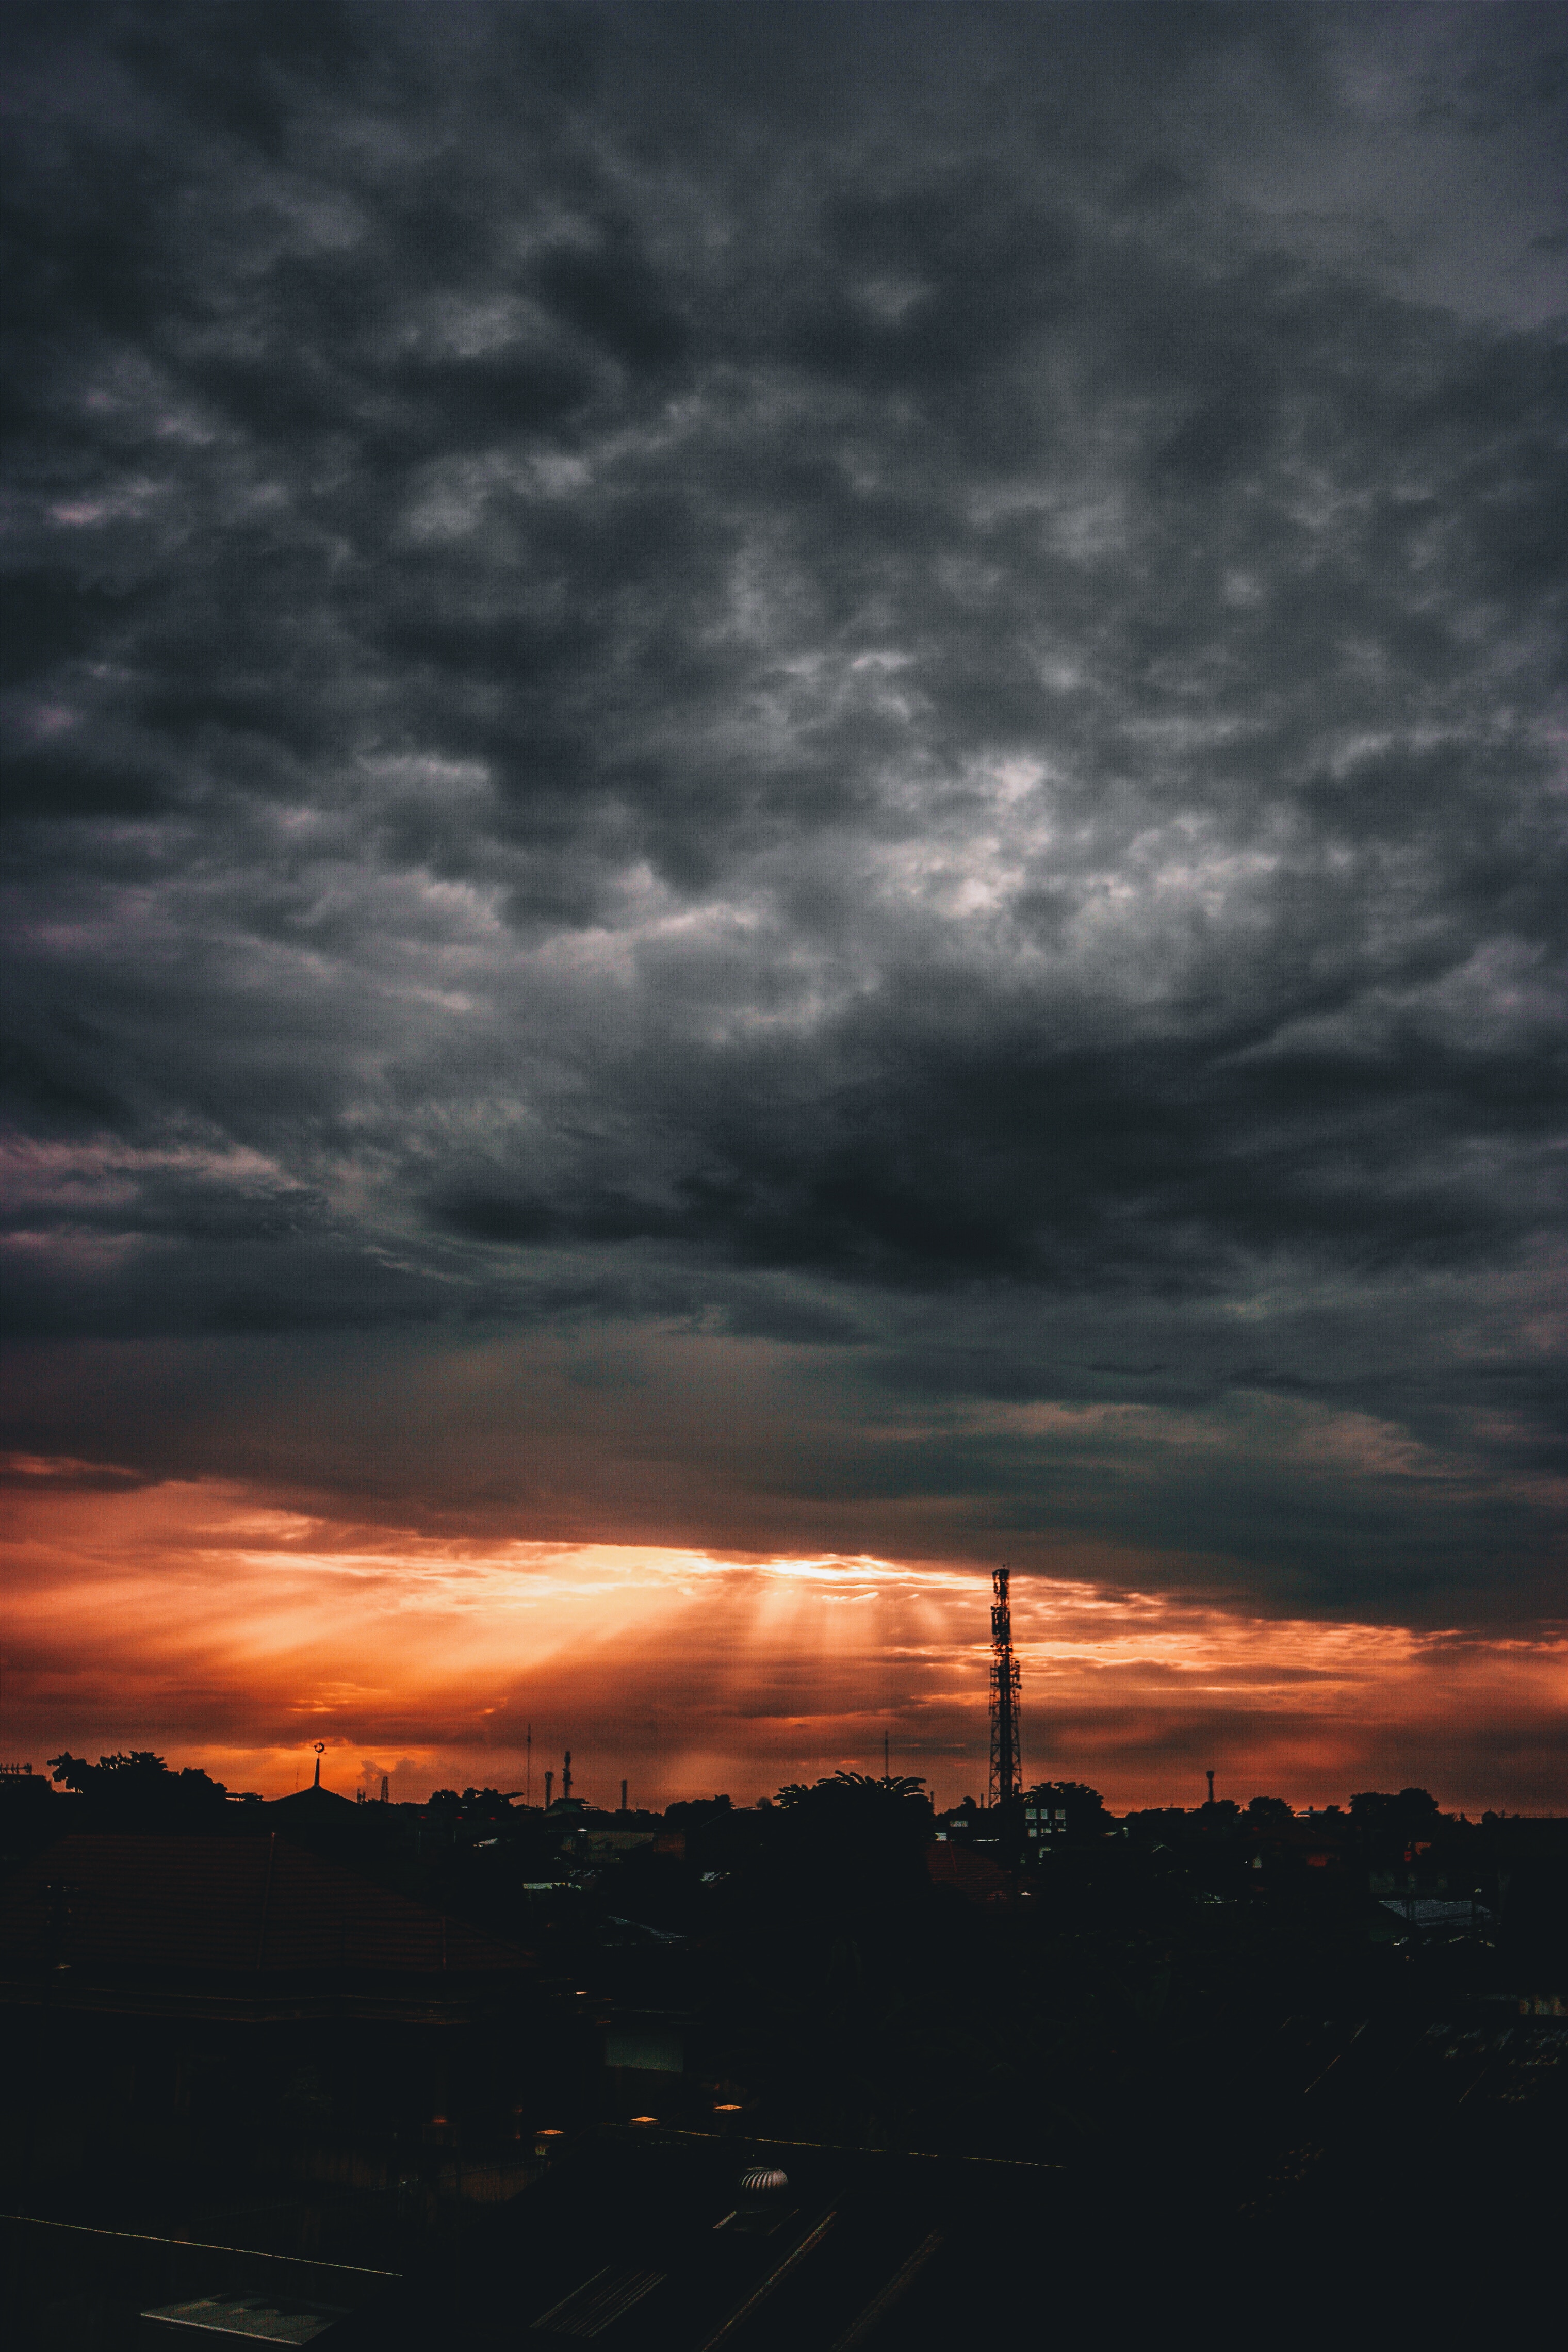 mainly cloudy, dark, indonesia, night, clouds, night city, overcast cell phone wallpapers